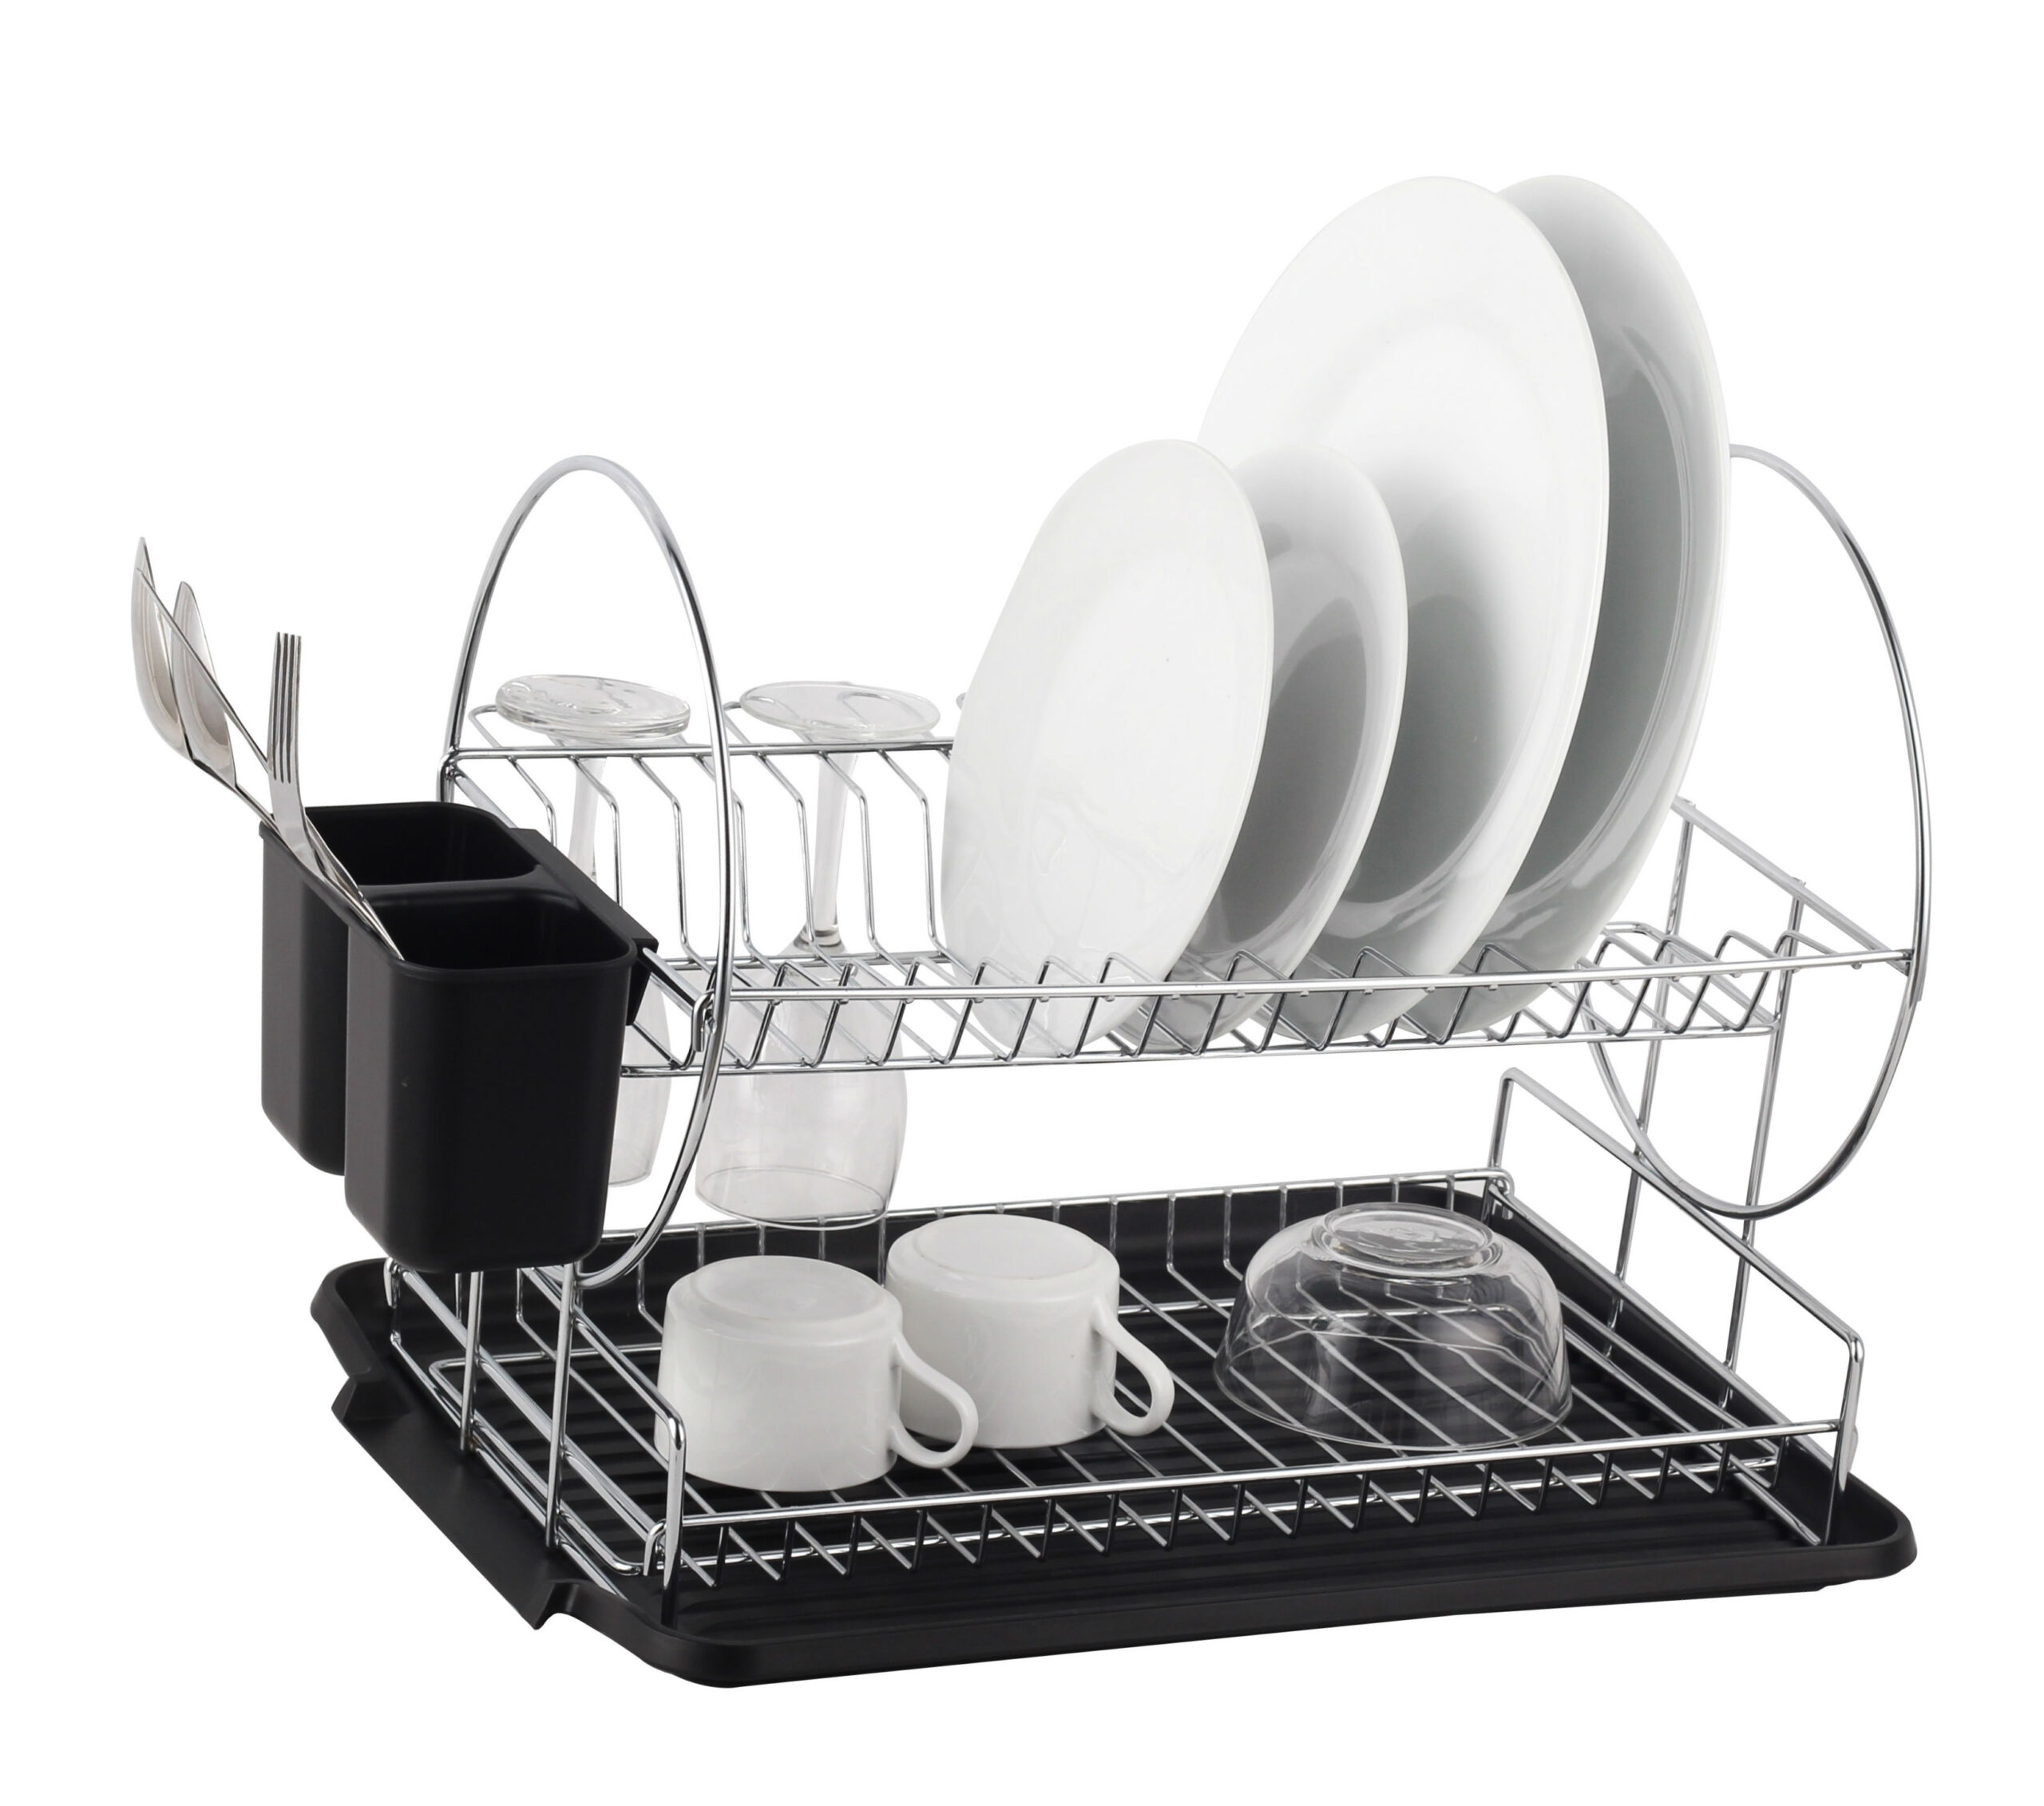 Deluxe Chrome-plated Steel 2-Tier Dish Rack with Drainboard